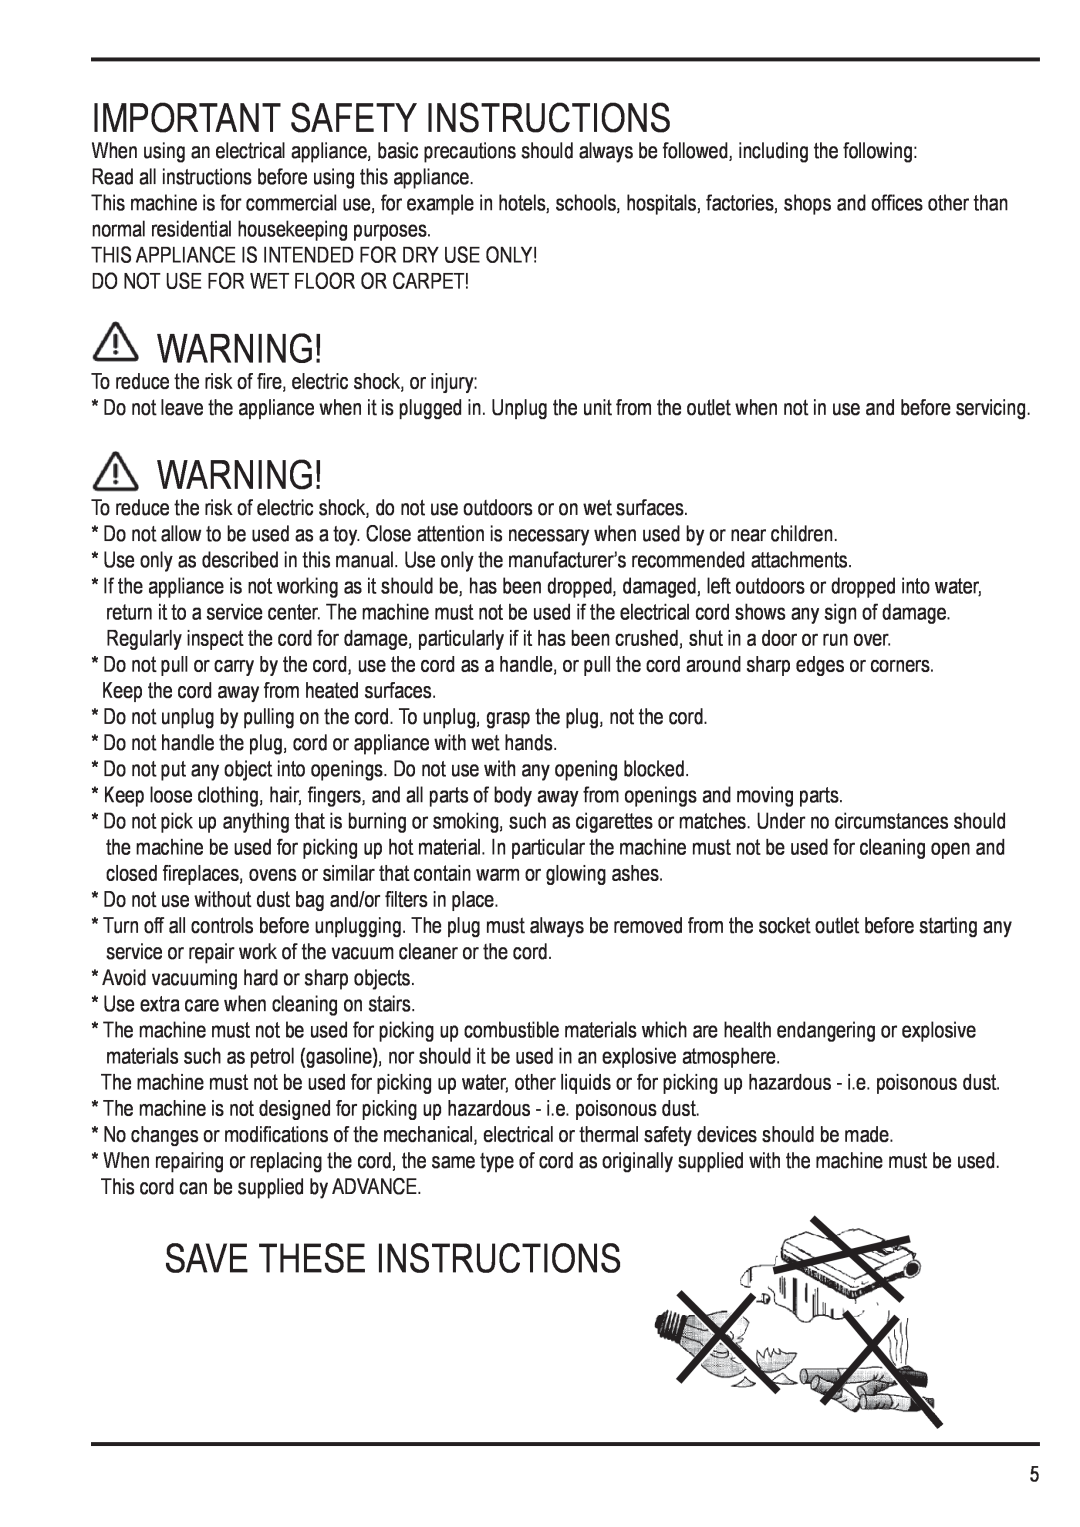 Nilfisk-Advance America 12H manual Important Safety Instructions, Save These Instructions 